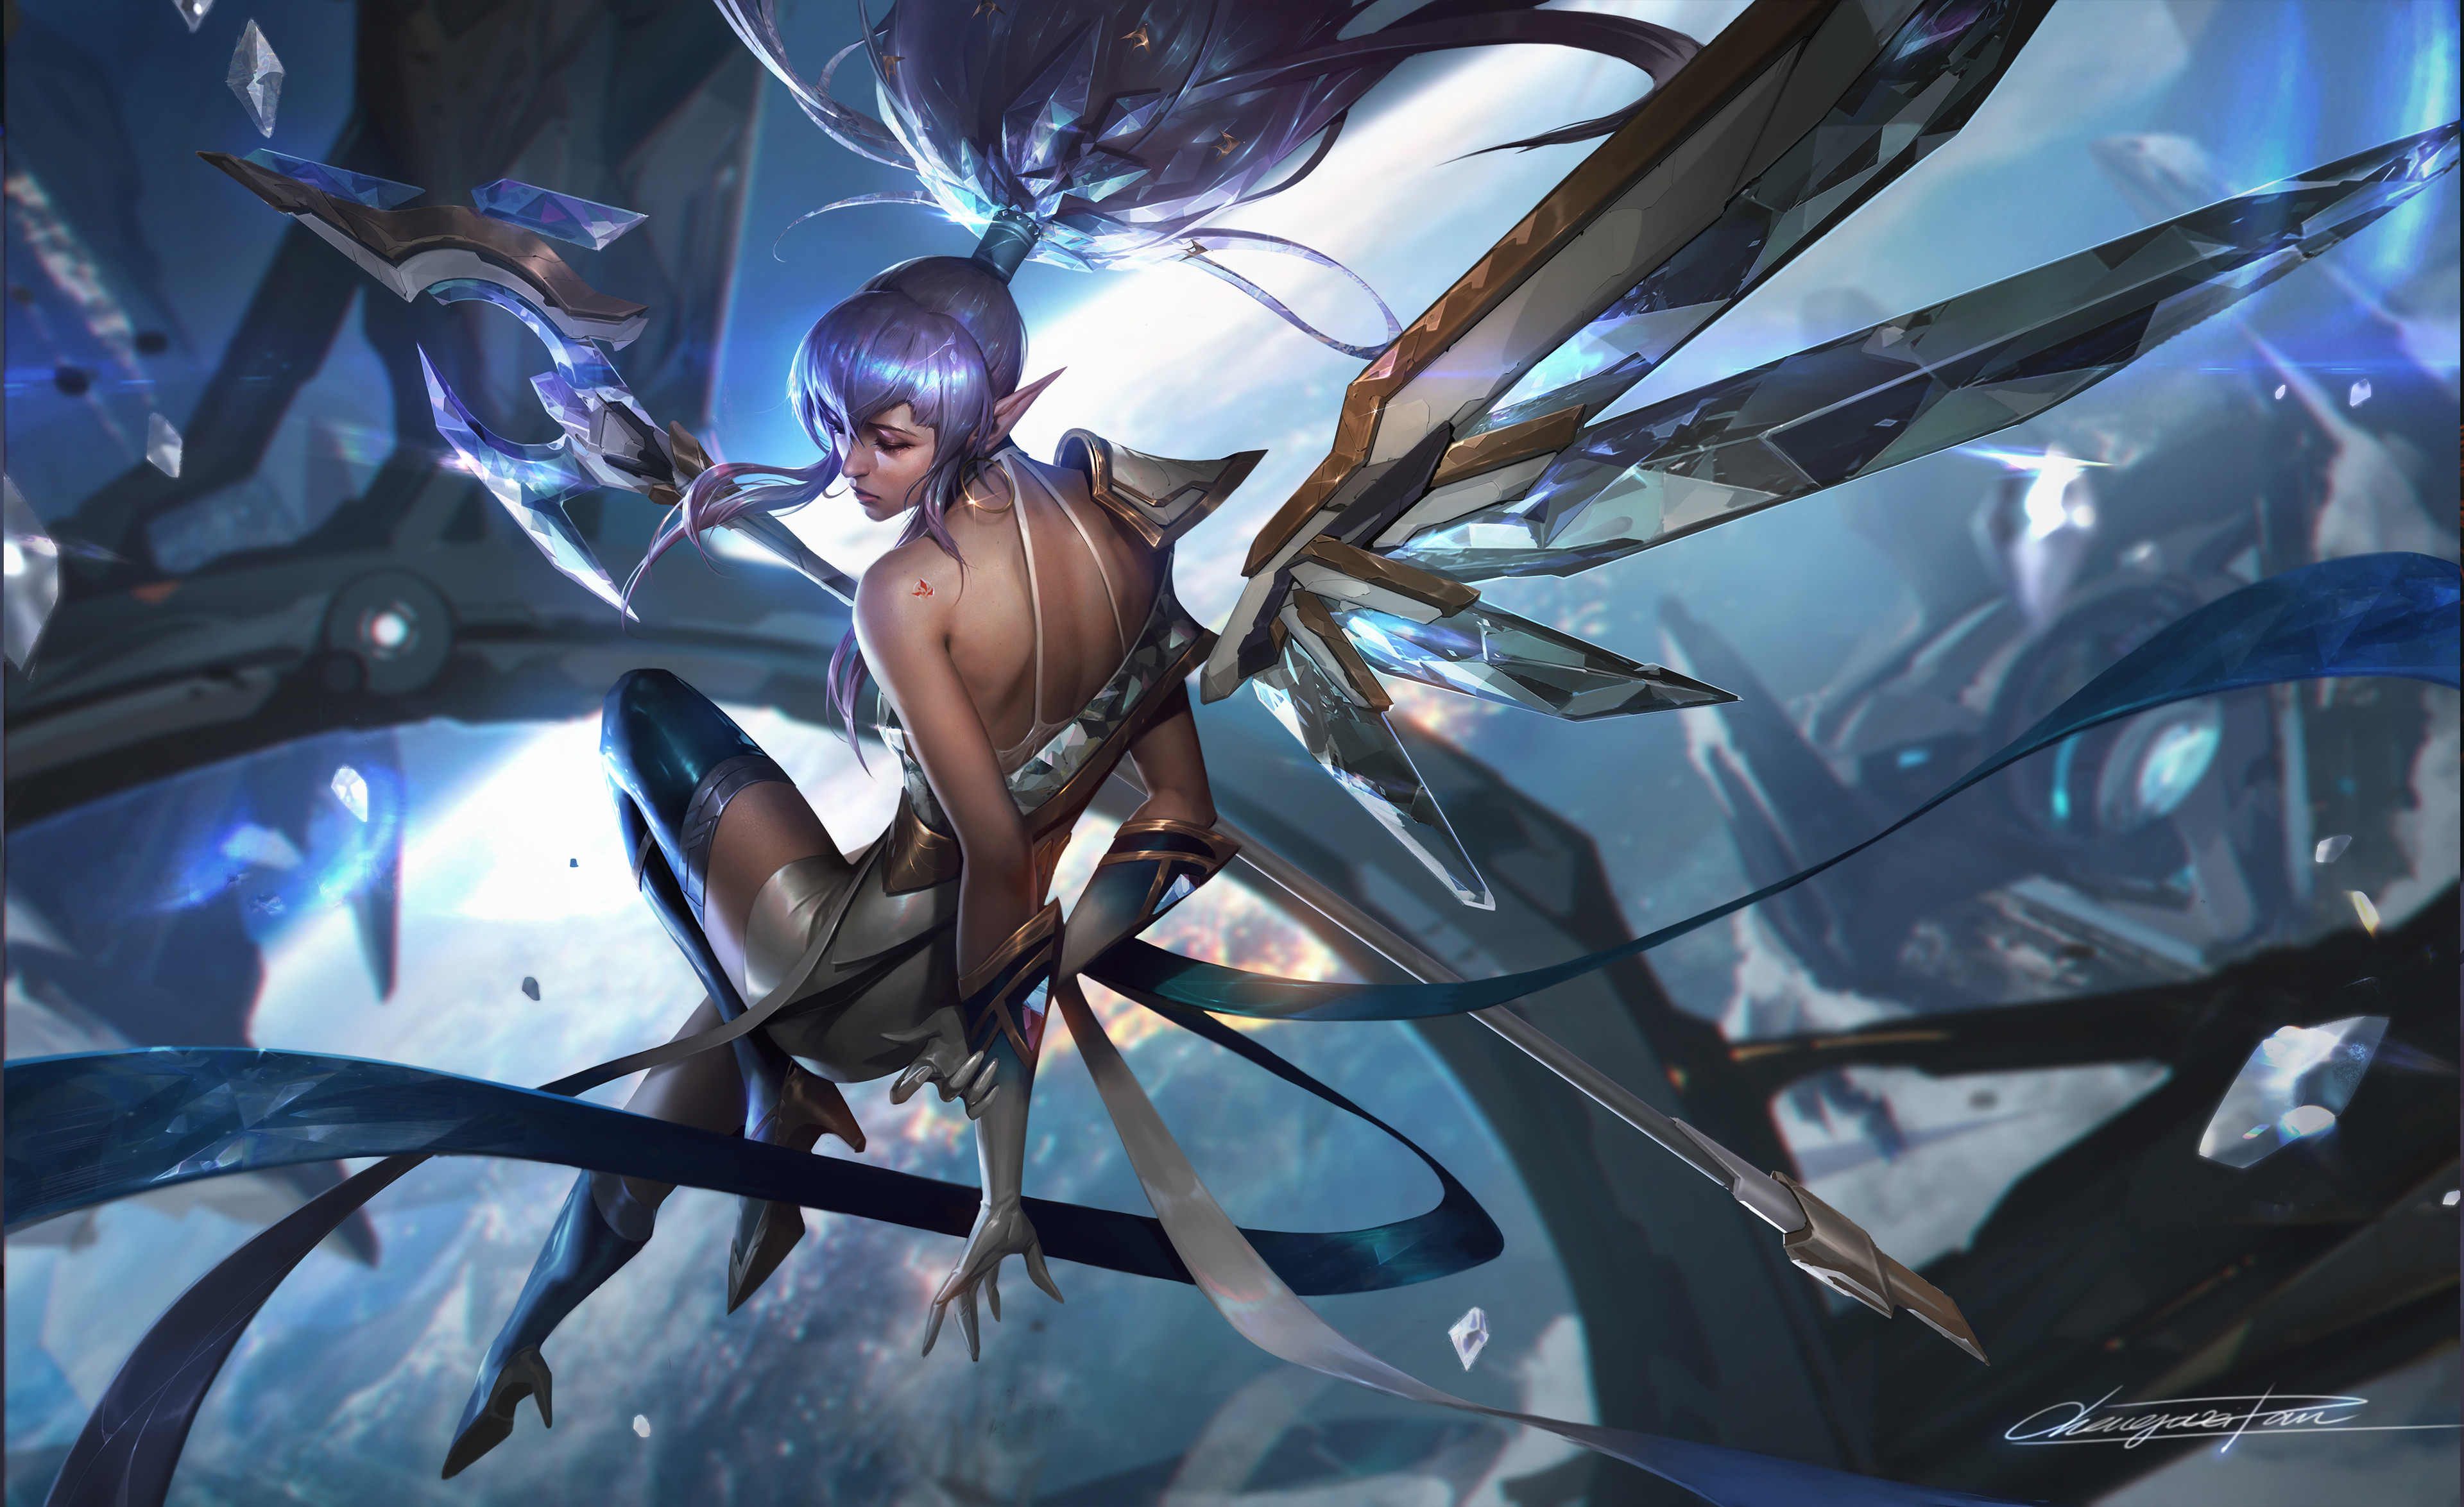 Chengwei Pan Drawing Janna League Of Legends Crystal Fantasy Art Flying Pointy Ears 3840x2349